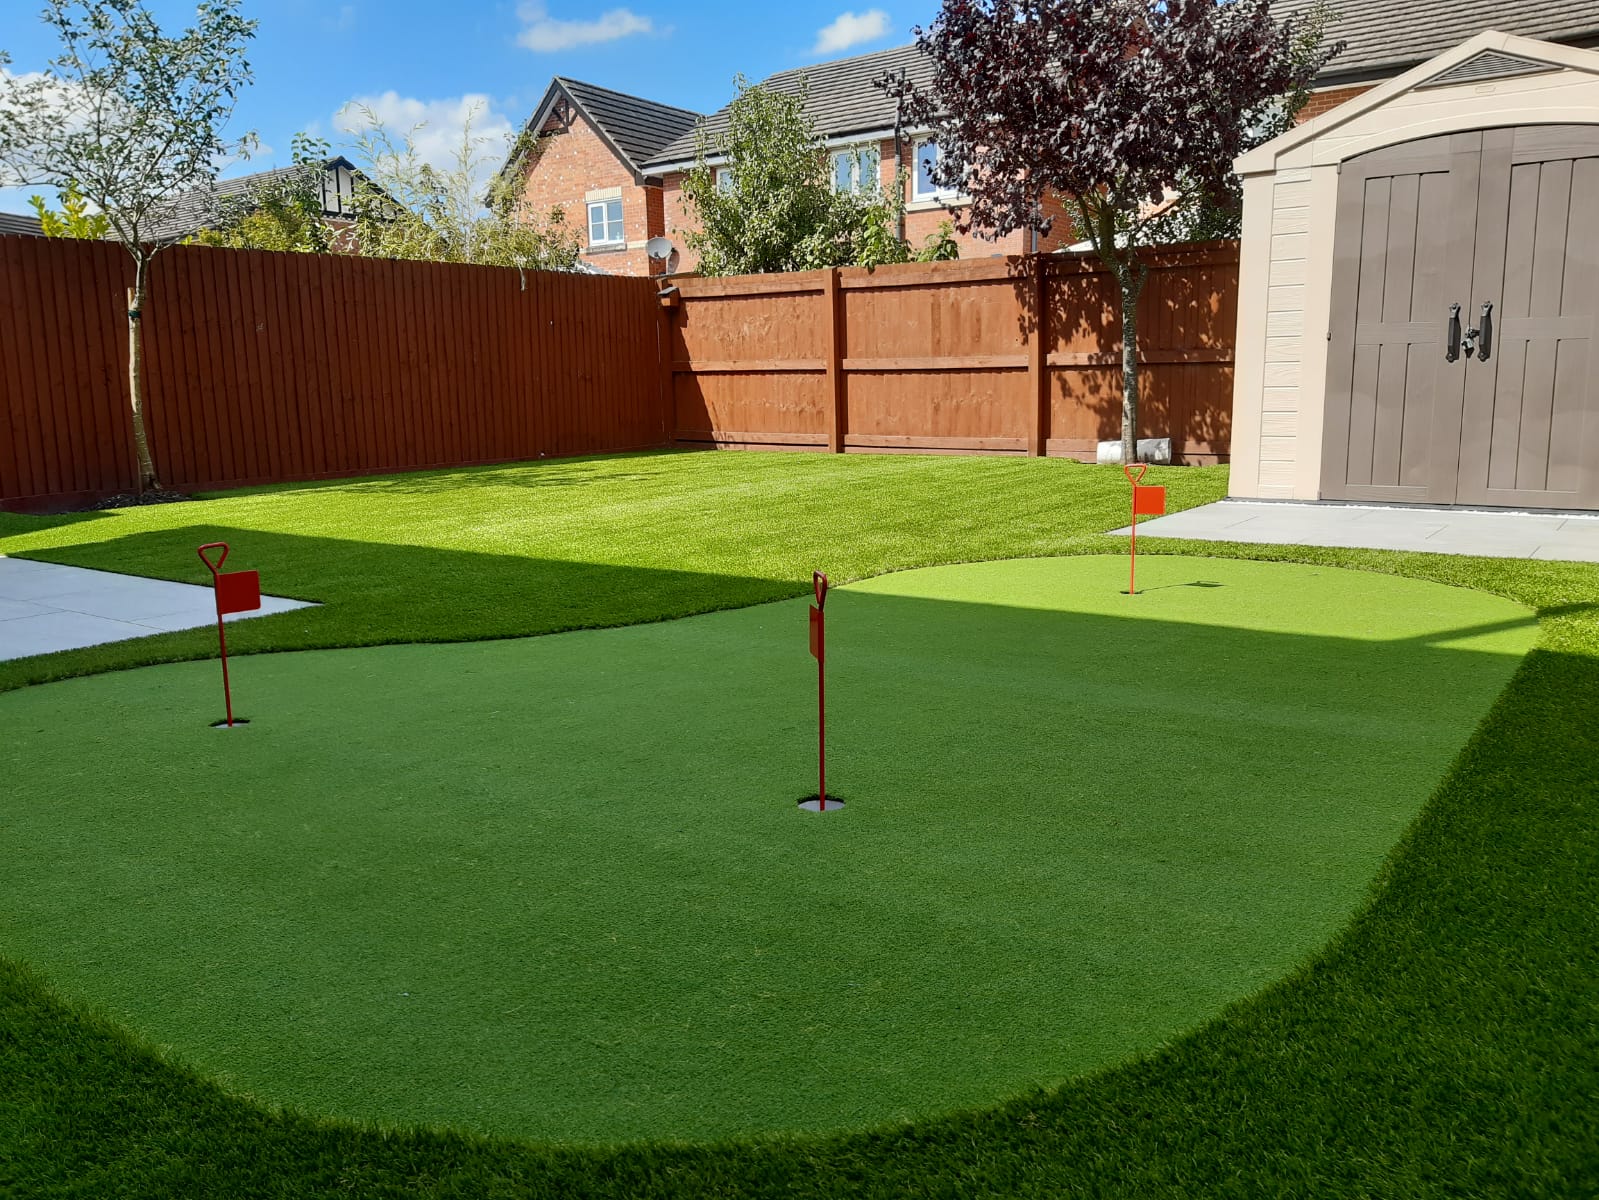 Artificial grass putting green with flags in the holes